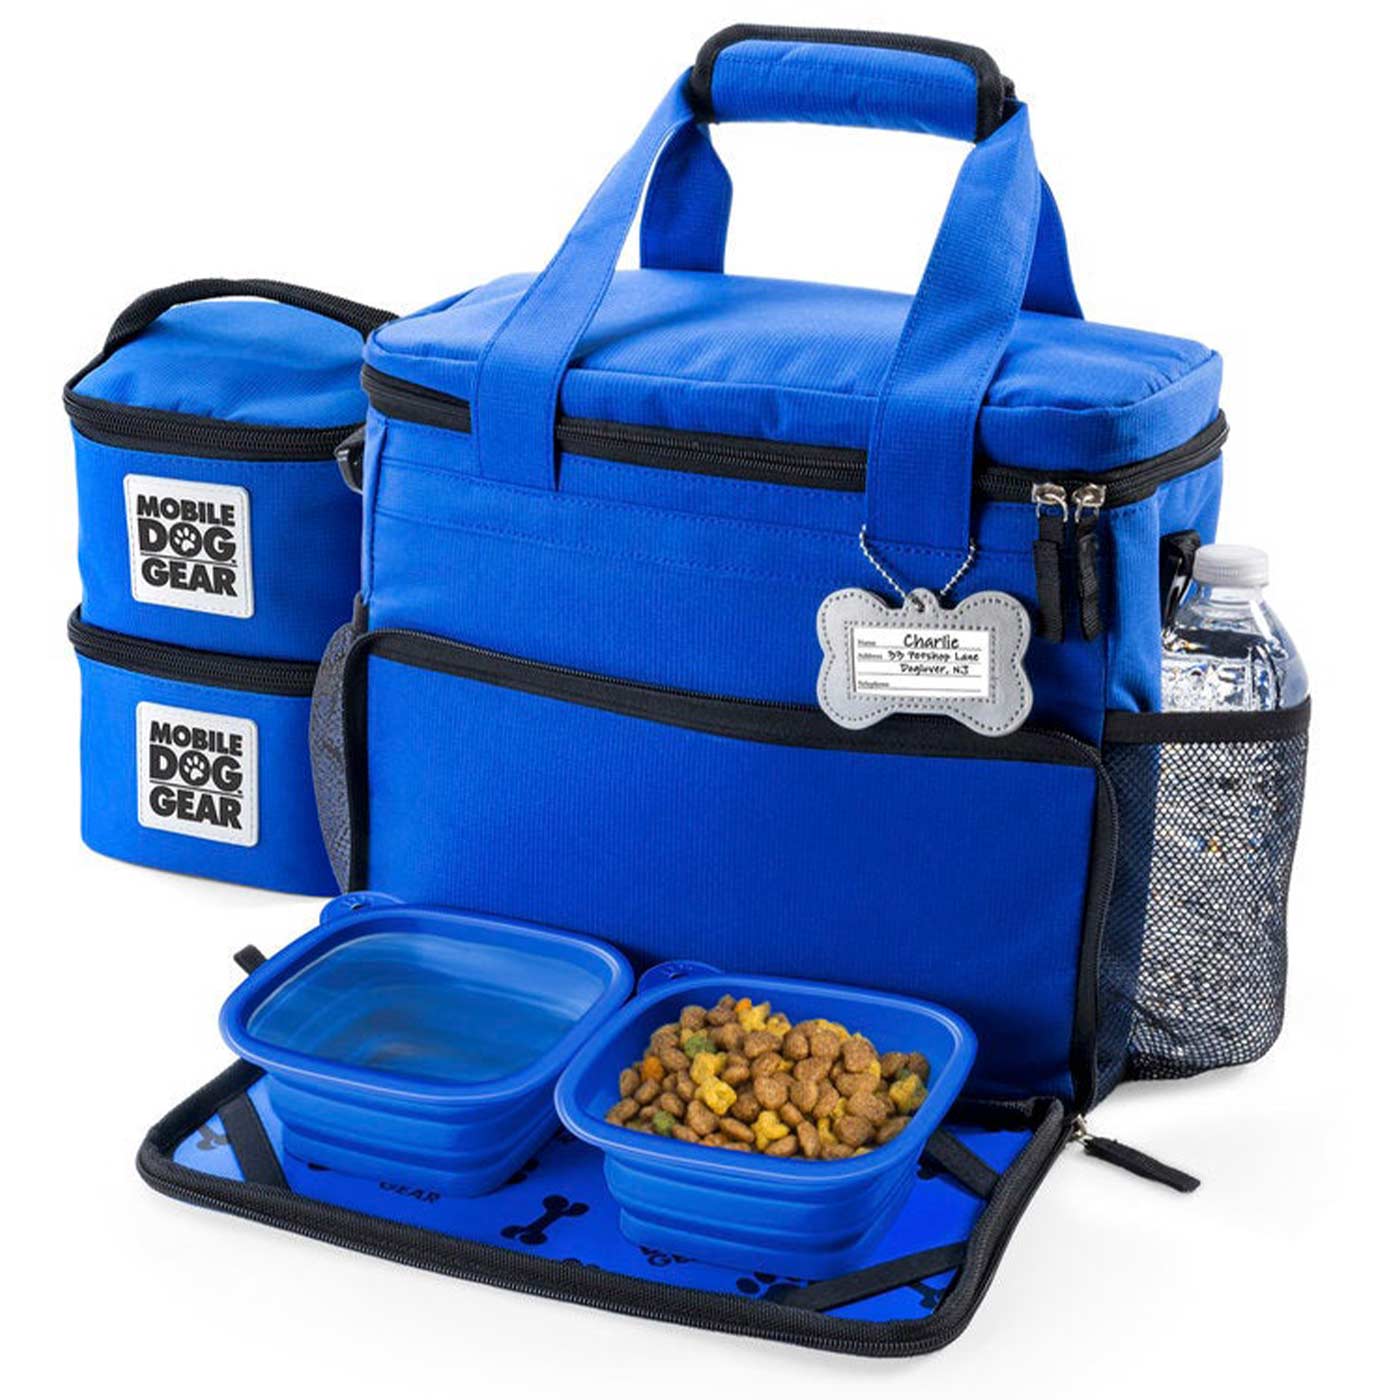 Discover, Mobile Dog Gear Week Away Bag, in Blue. The Perfect Away Bag for any Pet Parent, Featuring dividers to stack food and built in waste bag dispenser. Also Included feeding set, collapsible silicone bowls and placemat! The Perfect Gift For travel, meets airline requirements. Available Now at Lords & Labradors US